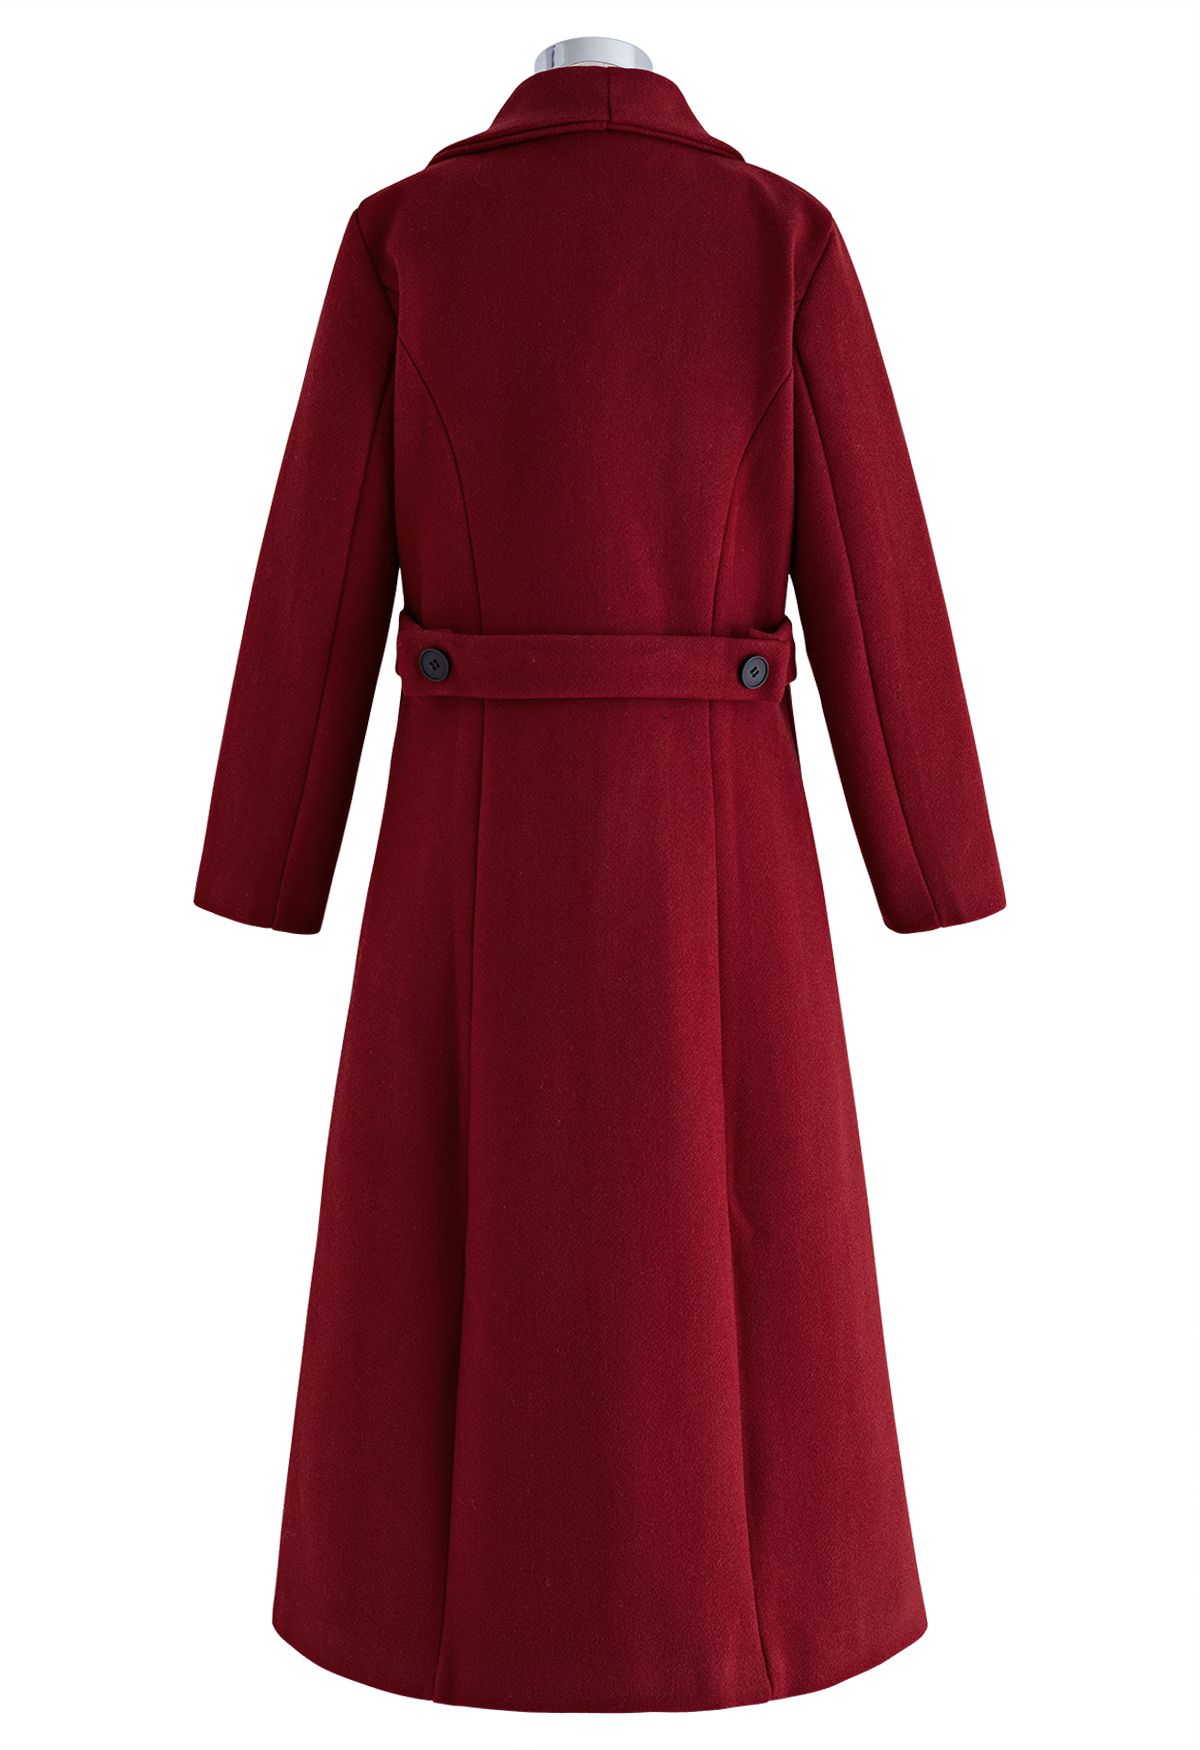 Wide Lapel Double-Breasted Flare Longline Coat in Red